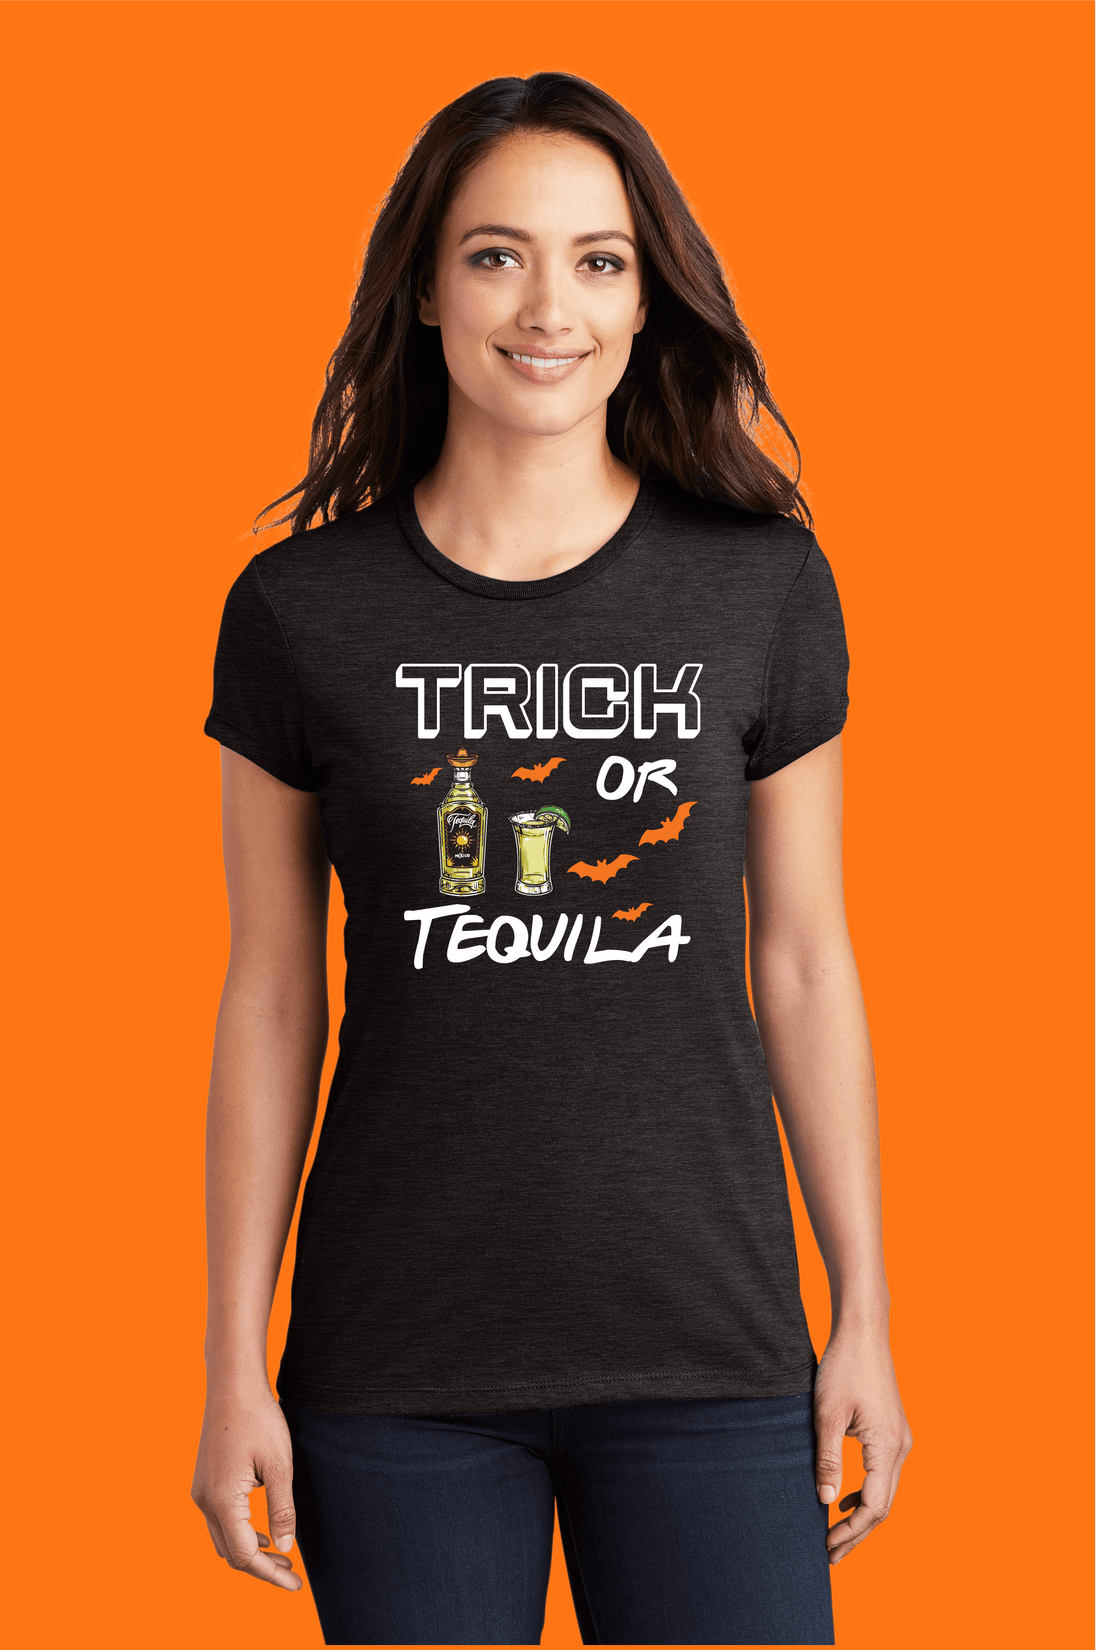 Trick or Tequila: The Ultimate Halloween Party Tee! 🥃🎃